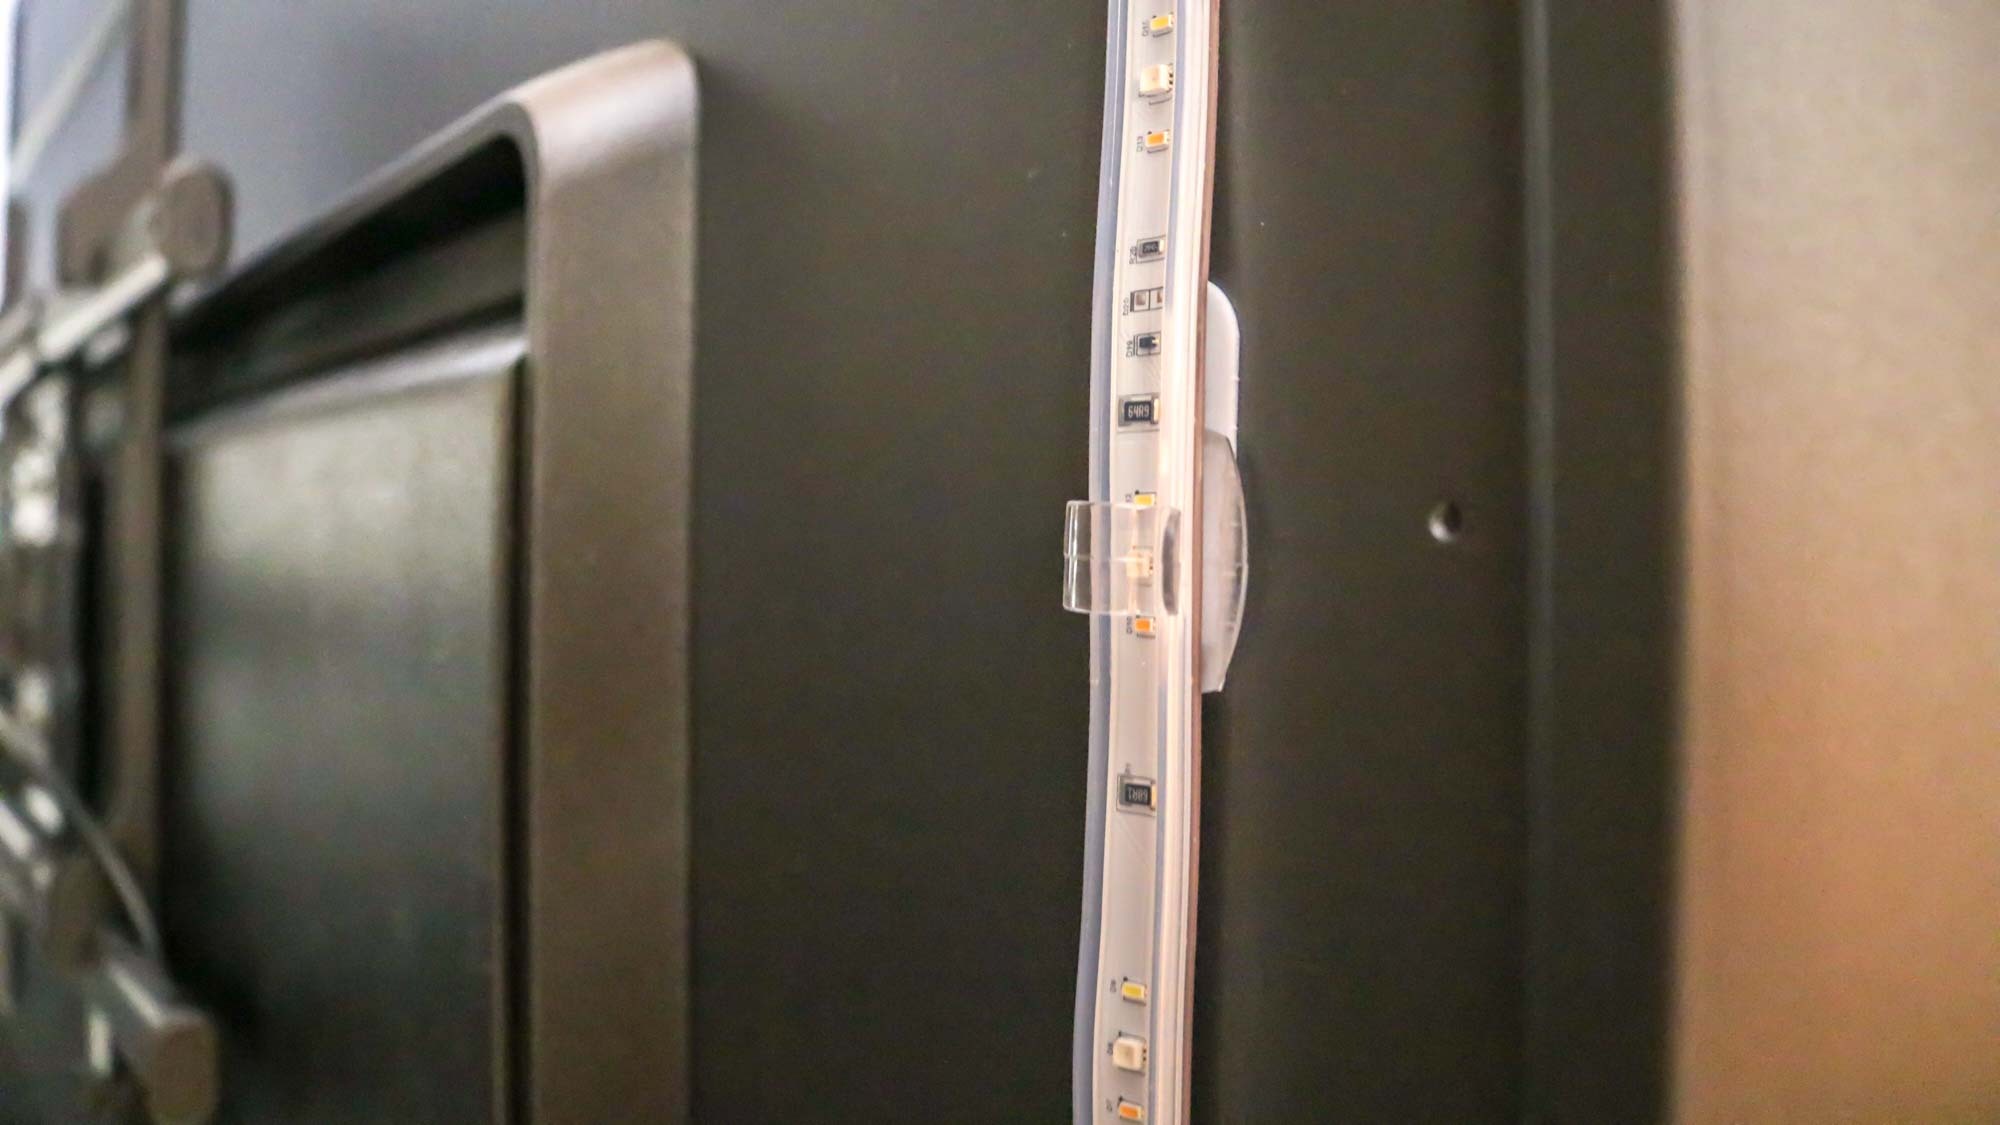 A clear clip attached to a TV holding a lightstrip